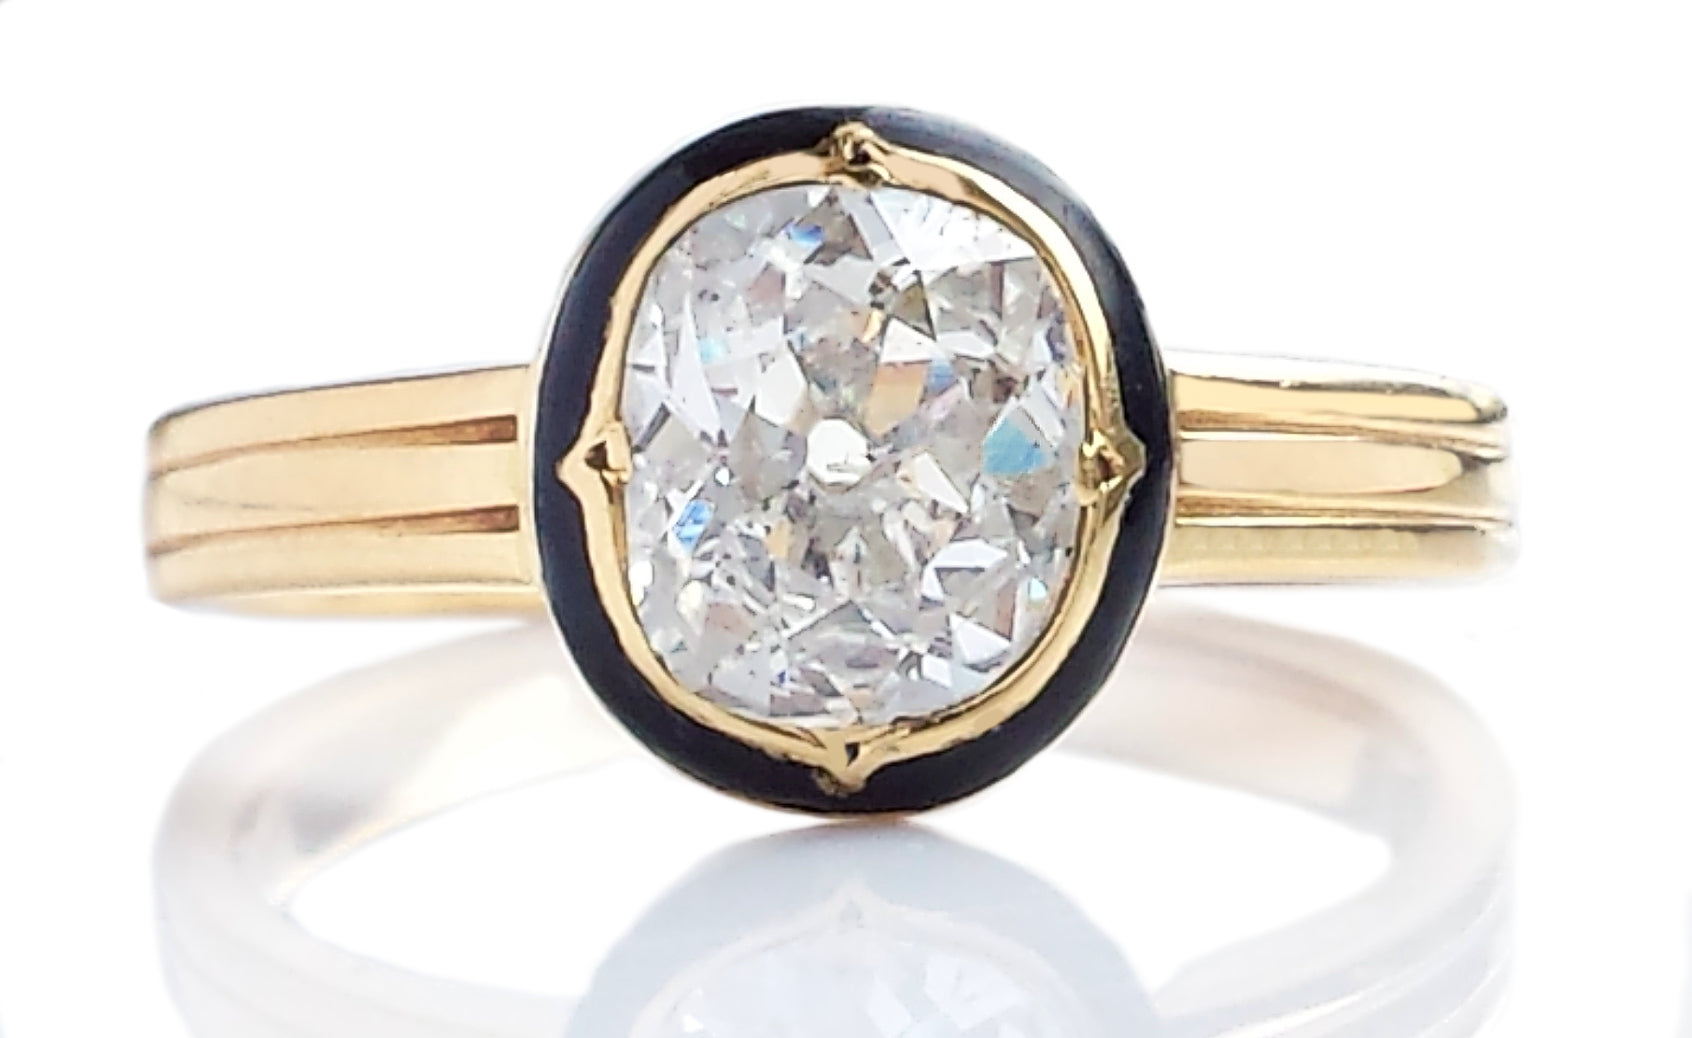 Antique 1.40ct G/I1 Old Mine Cut Diamond Engagement Ring in 18k Yellow Gold